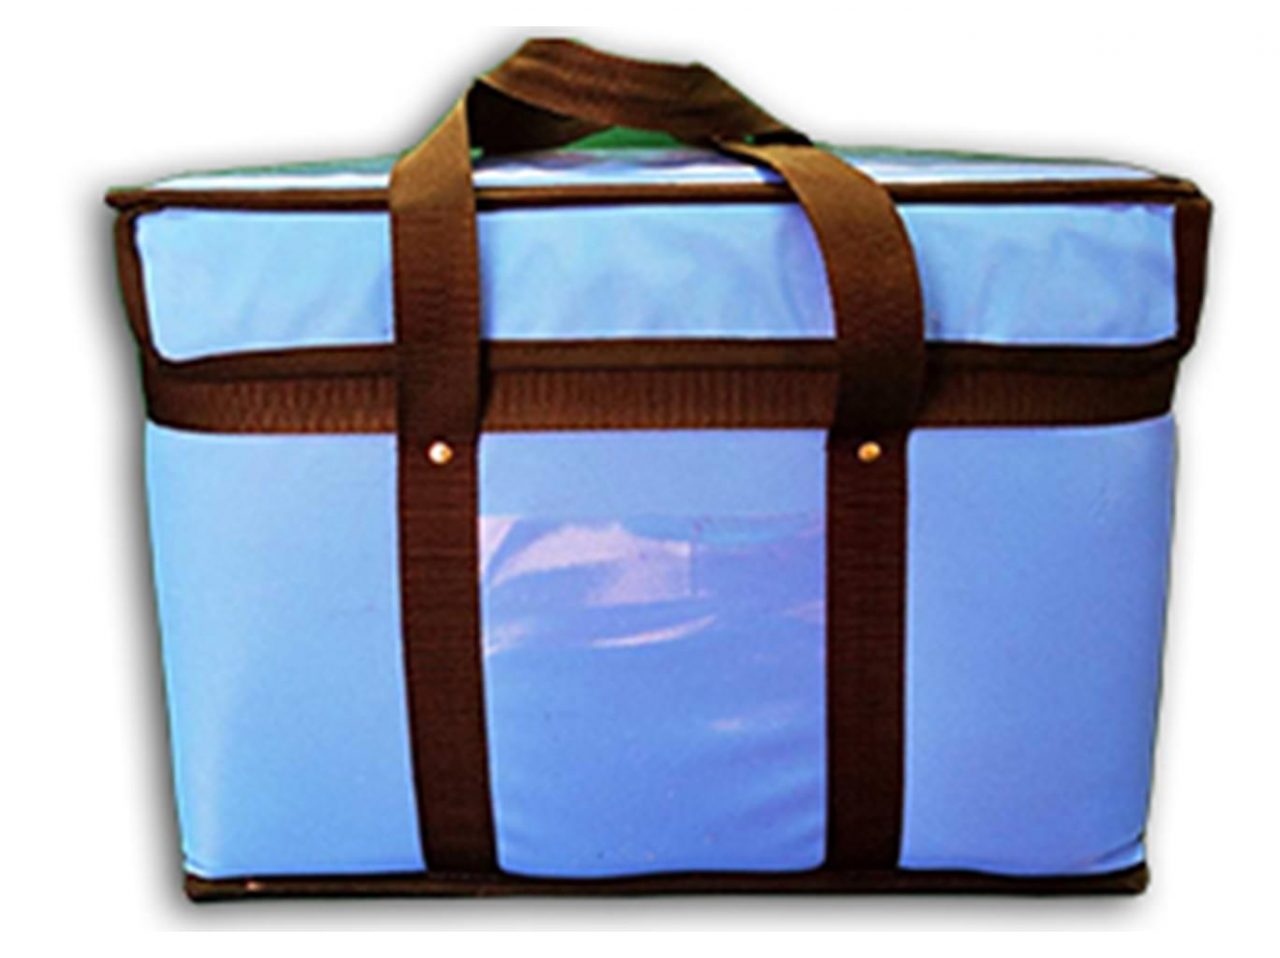 tempack-patient-bags-covers-reusable-packaging-4@2x-1280x958